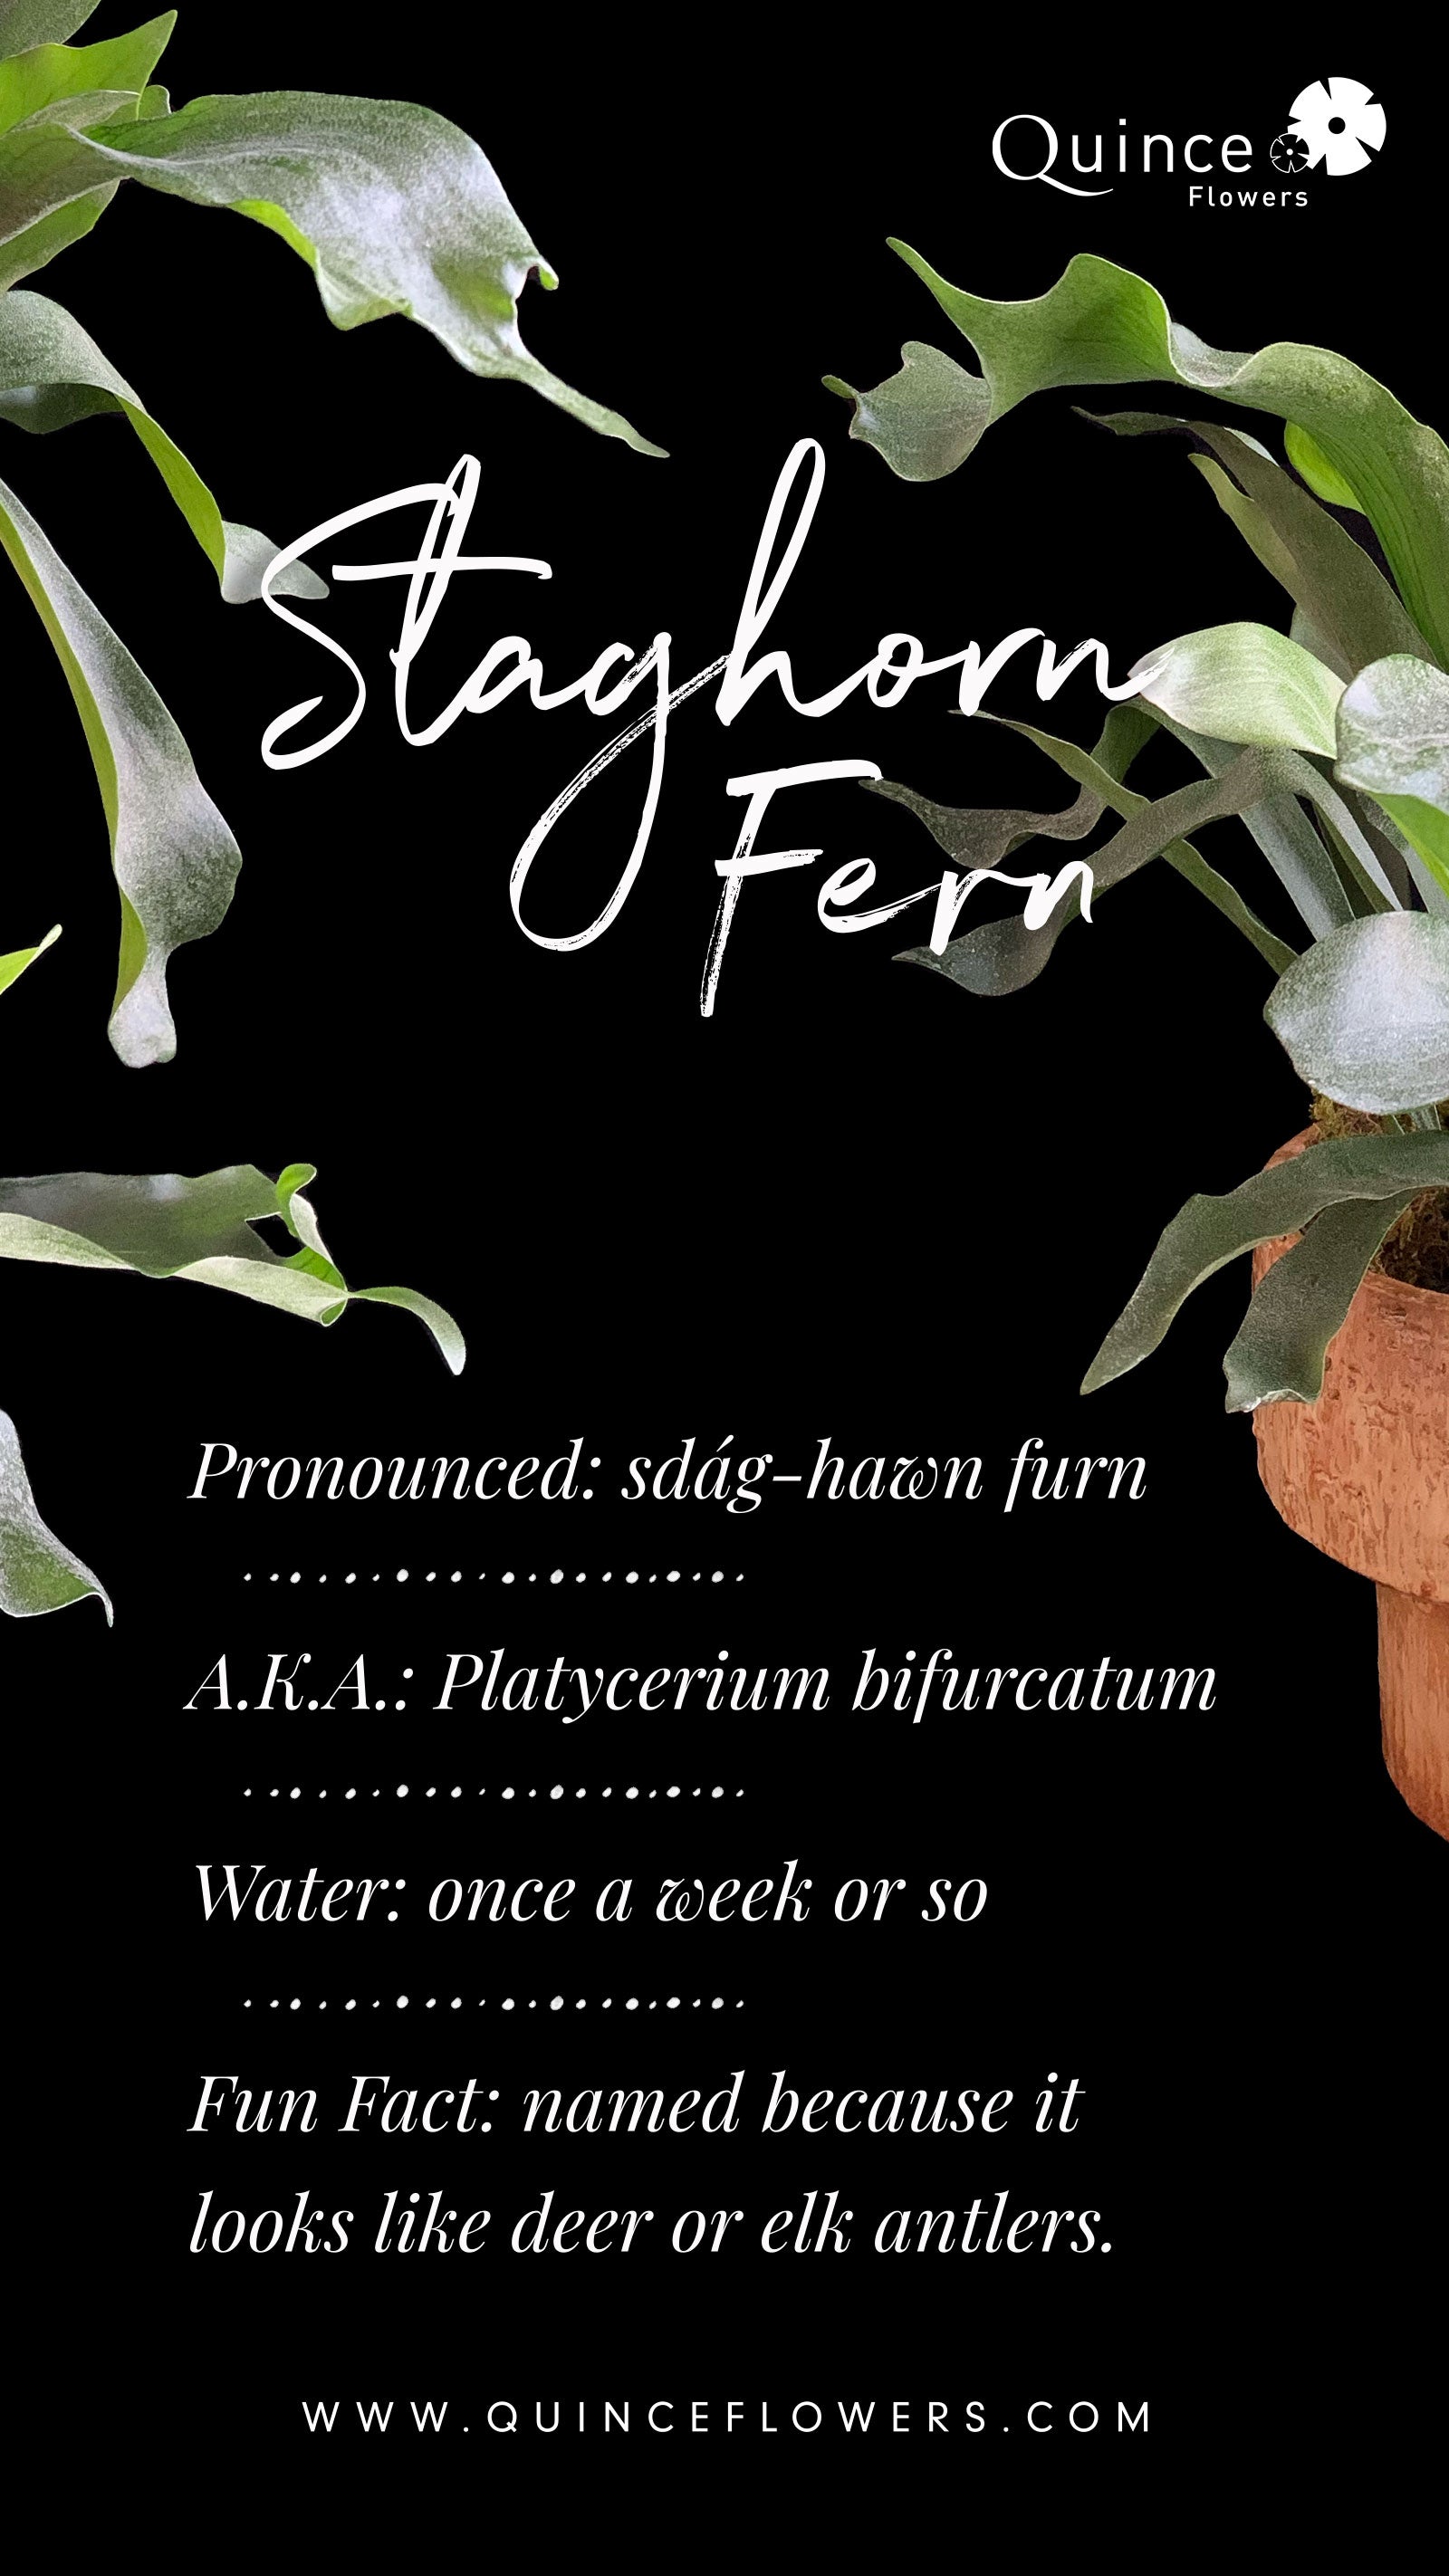 An informational poster about Staghorn Fern by Quince Flowers, including images of the plant, its pronunciation, scientific name, watering instructions, and a fun fact that it resembles deer or elk antlers. Order online for same-day flower delivery from the best florist in Toronto near you.